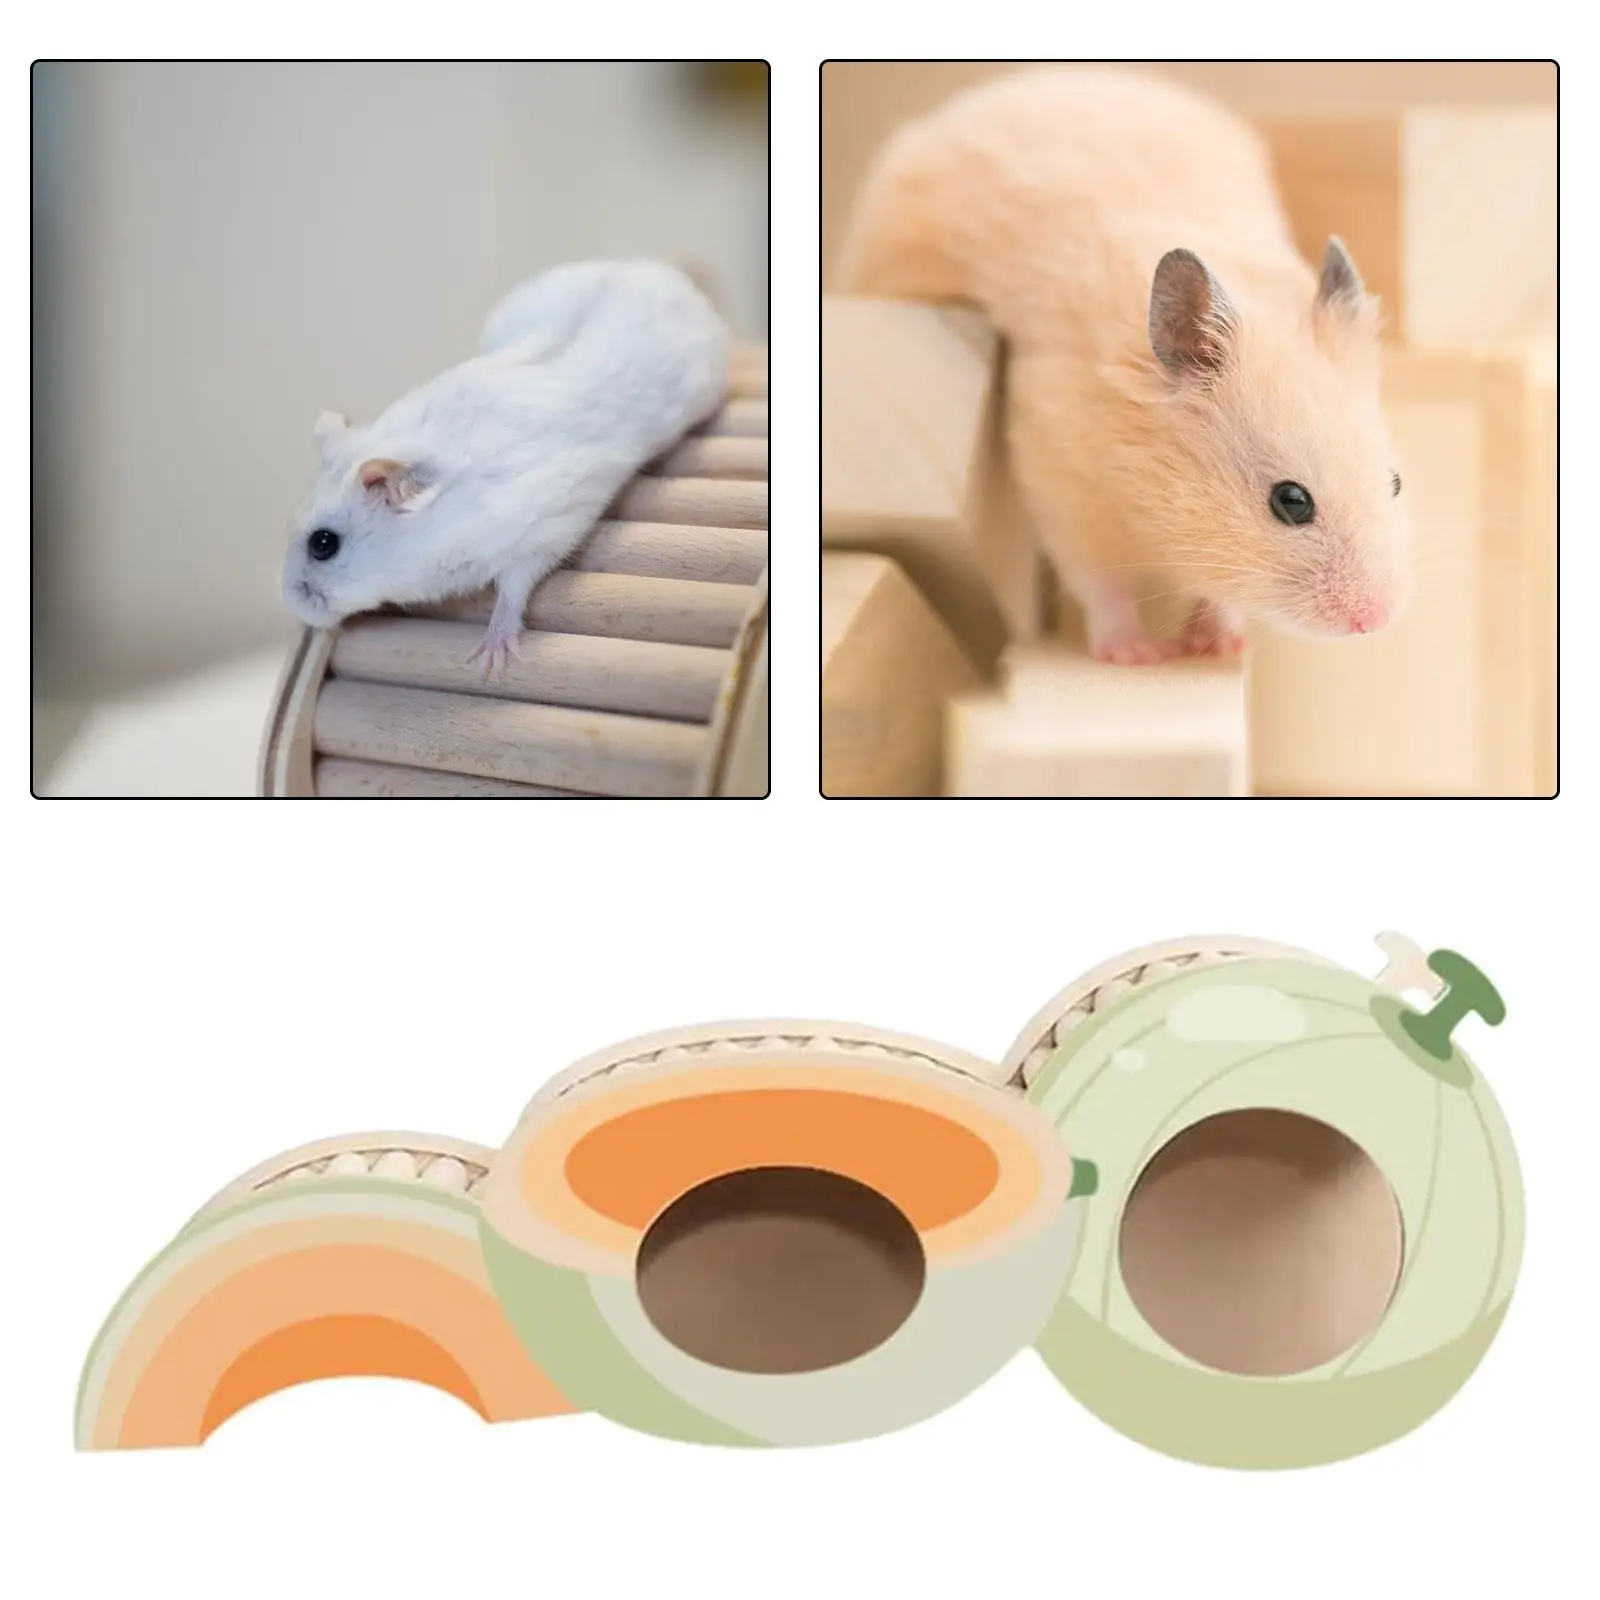 Creative Hamster Tunnel Bedding Hamster Cage Accessories Small Animals Sleeping House for Small Animals Guinea Pig Hamster